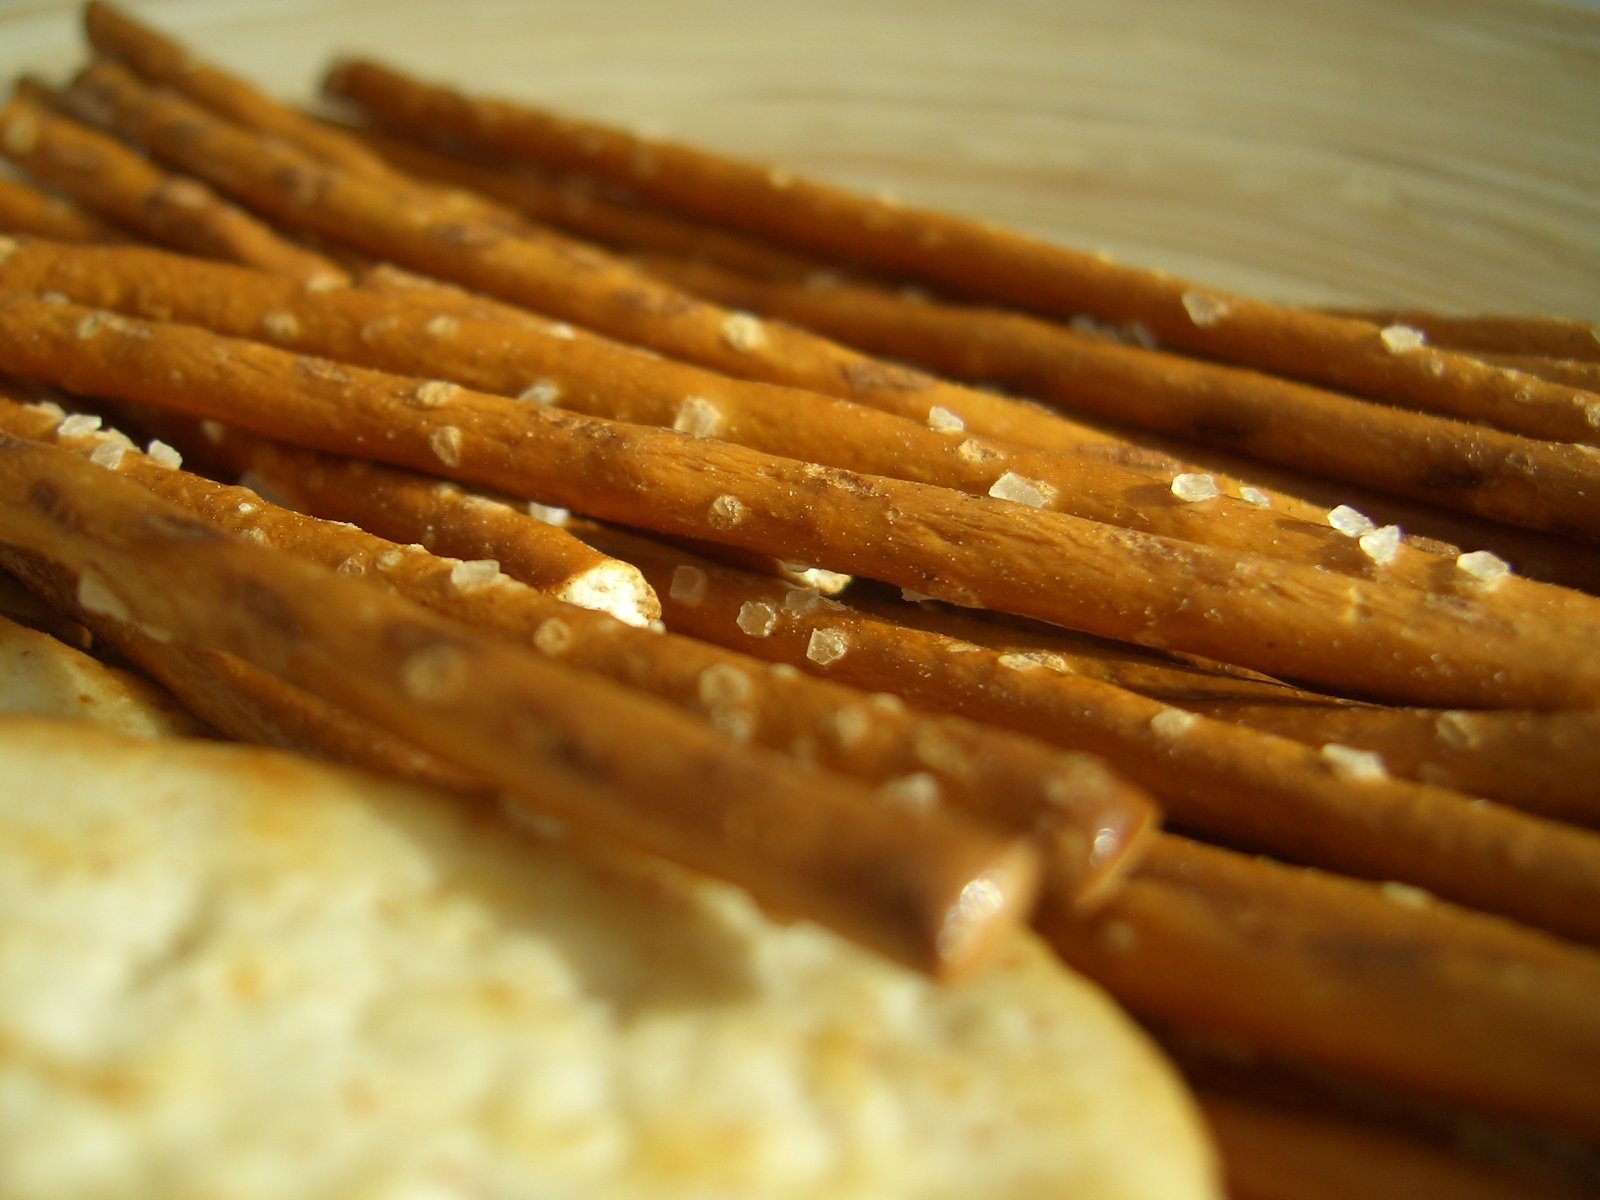 a wooden plate of dog sticks and some other snack ingredients